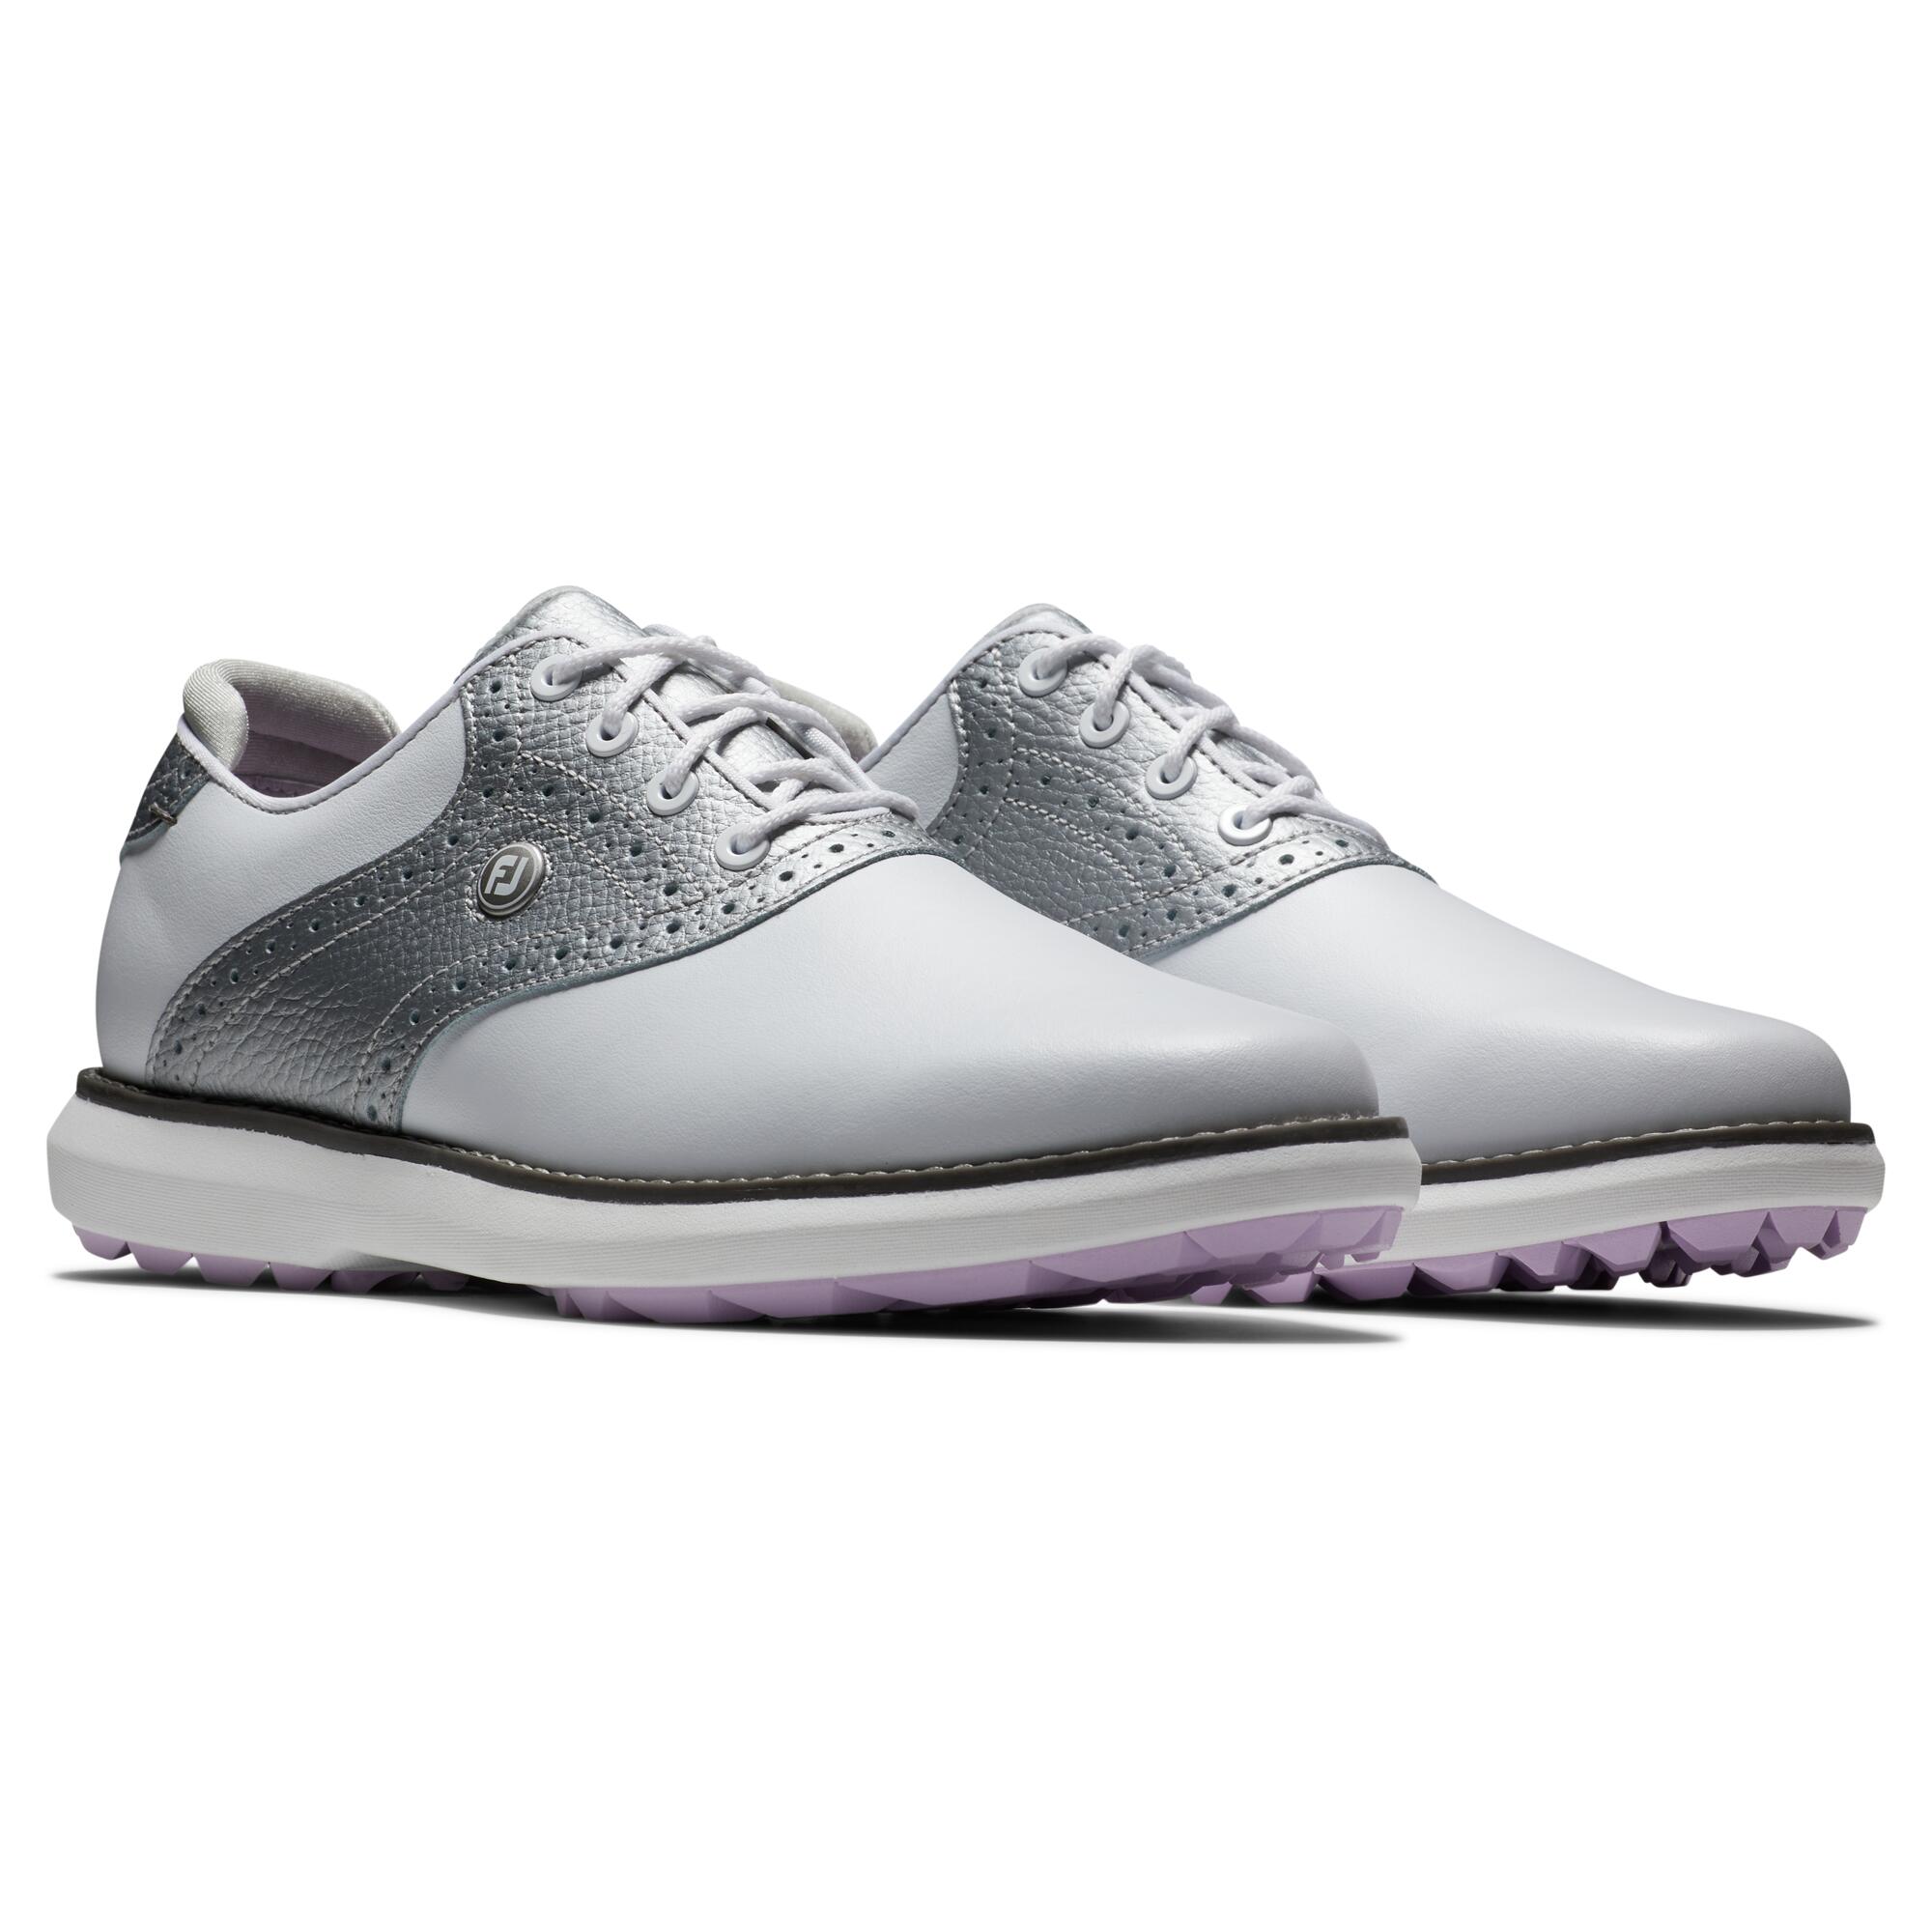 WOMEN'S WATERPROOF GOLF SHOES FJ TRADITION - WHITE AND SILVER 3/6